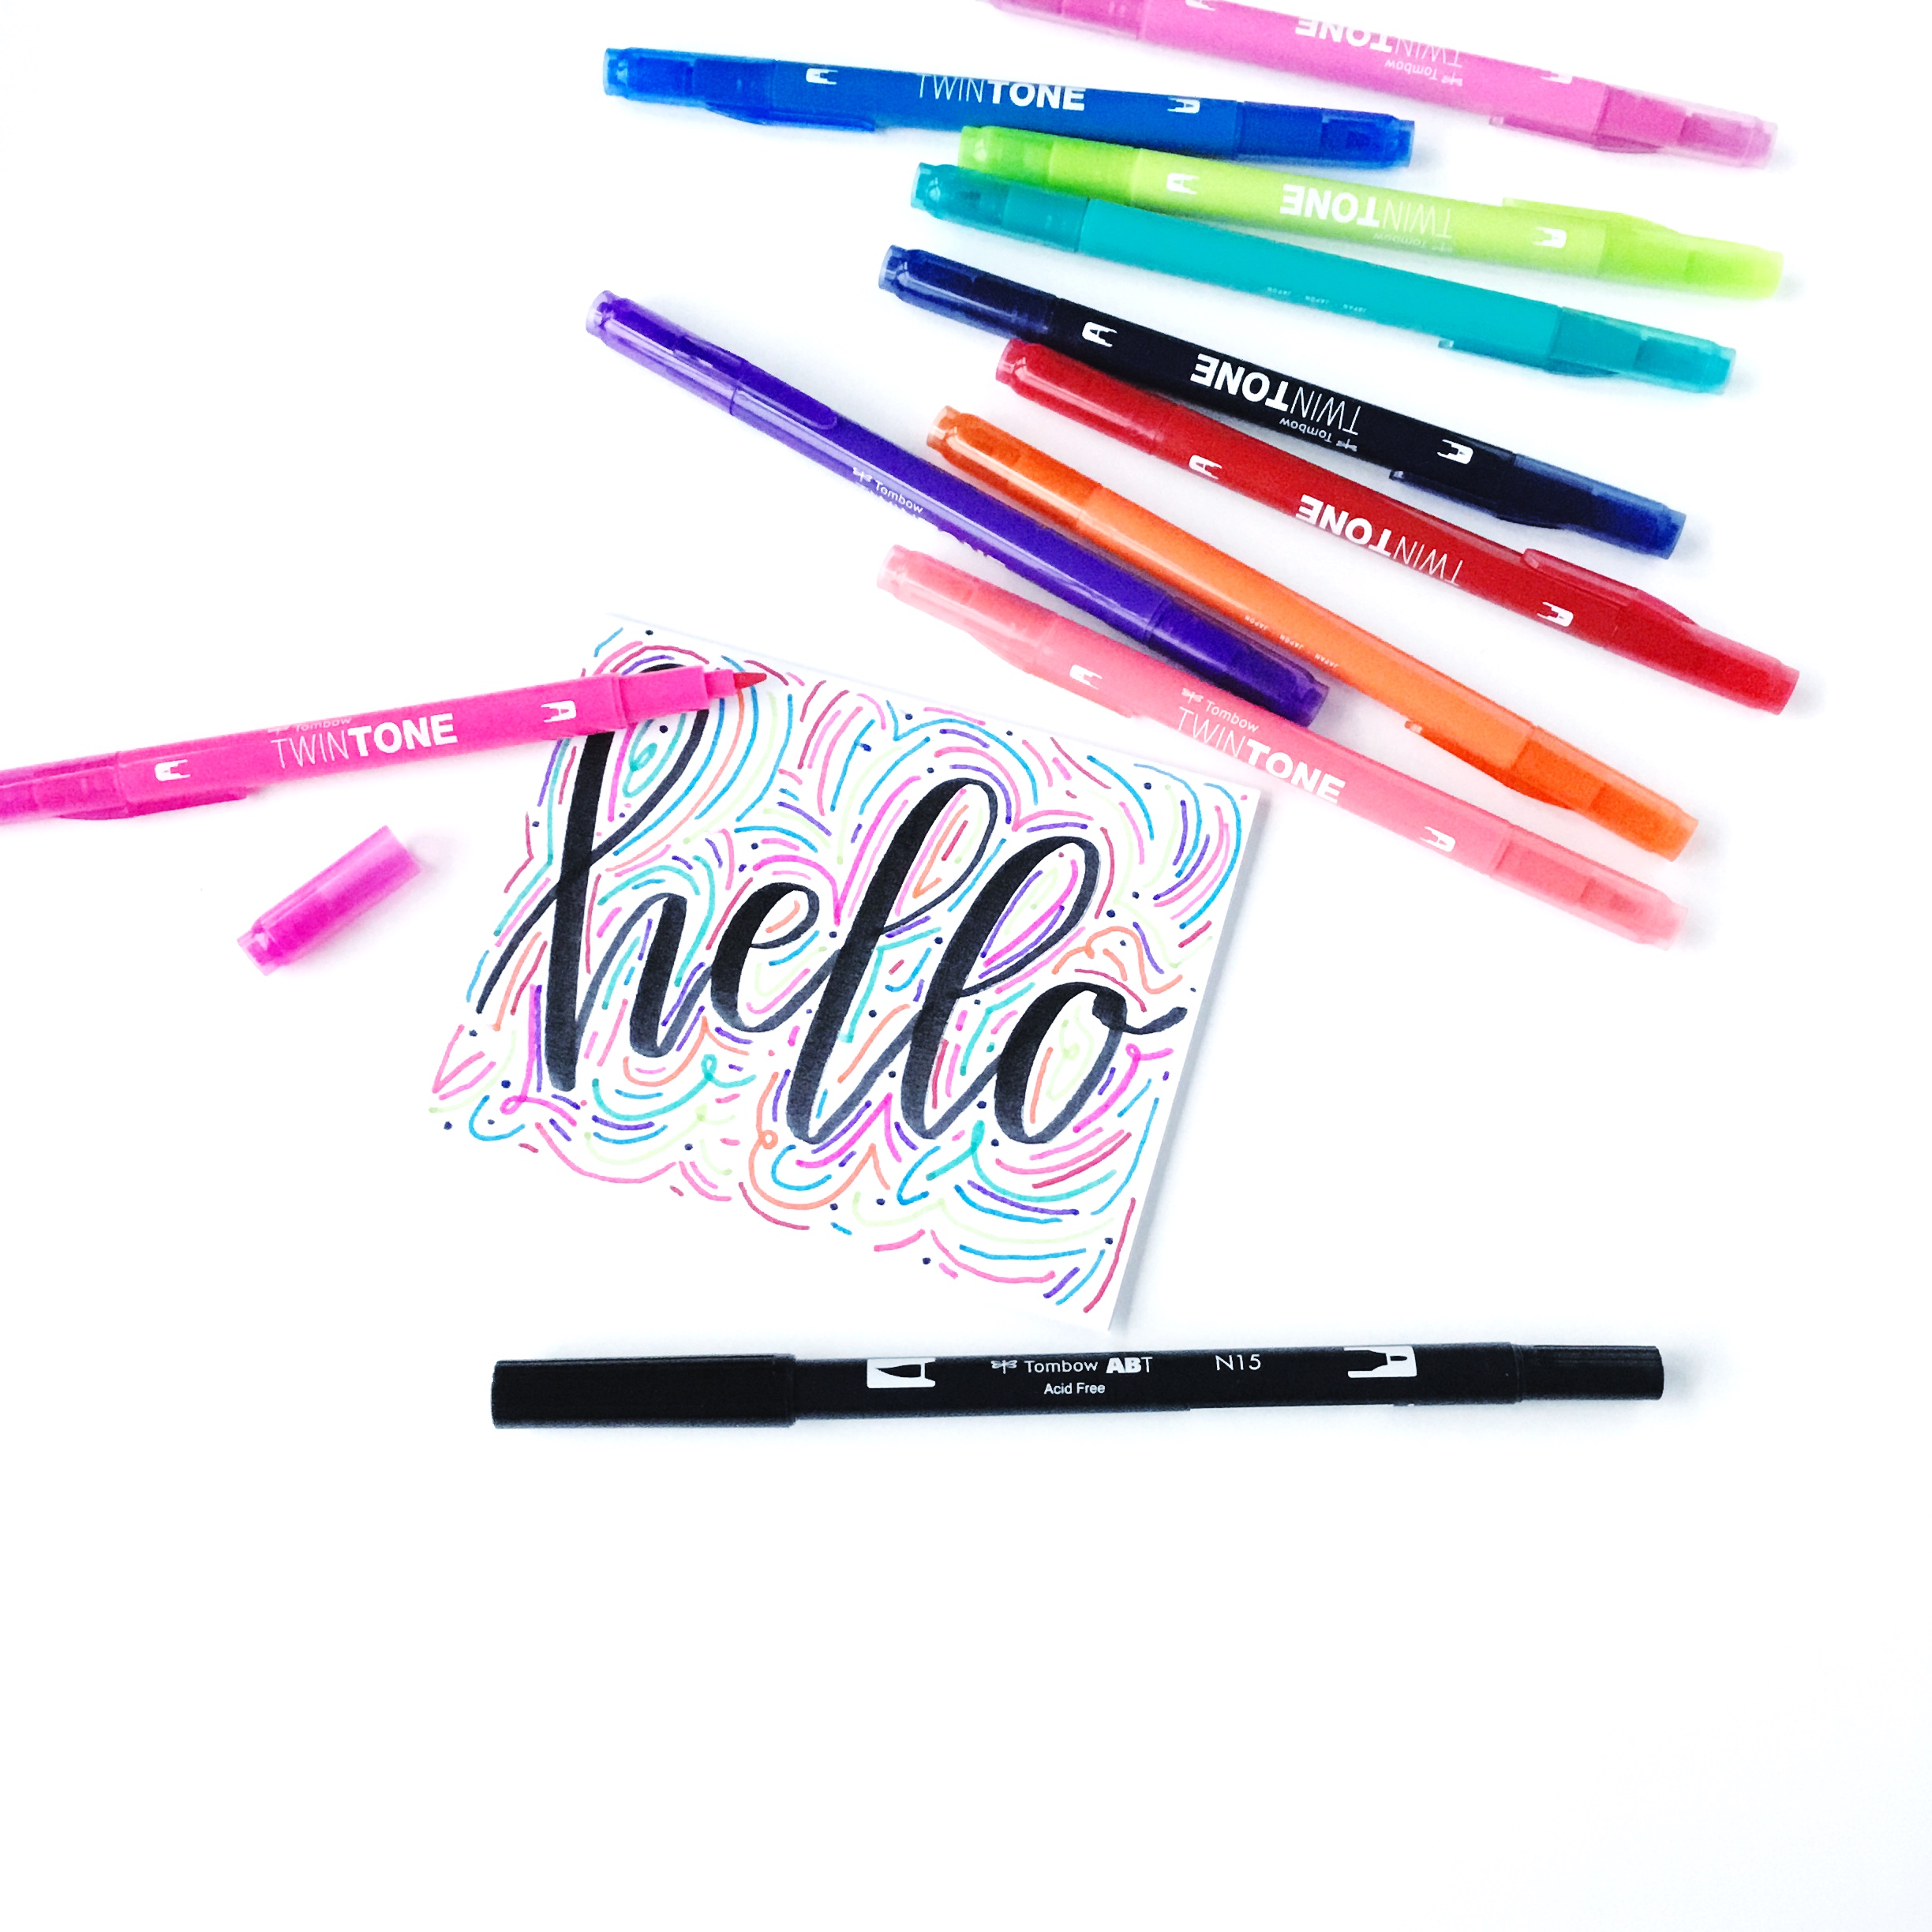 Learn how to embellish brush lettering with Tombow TwinTones from Lauren Fitzmaurice of @renmadecalligraphy on Instagram! For more lettering tips and tricks check out renmadecalligraphy.com or blog.tombowusa.com.